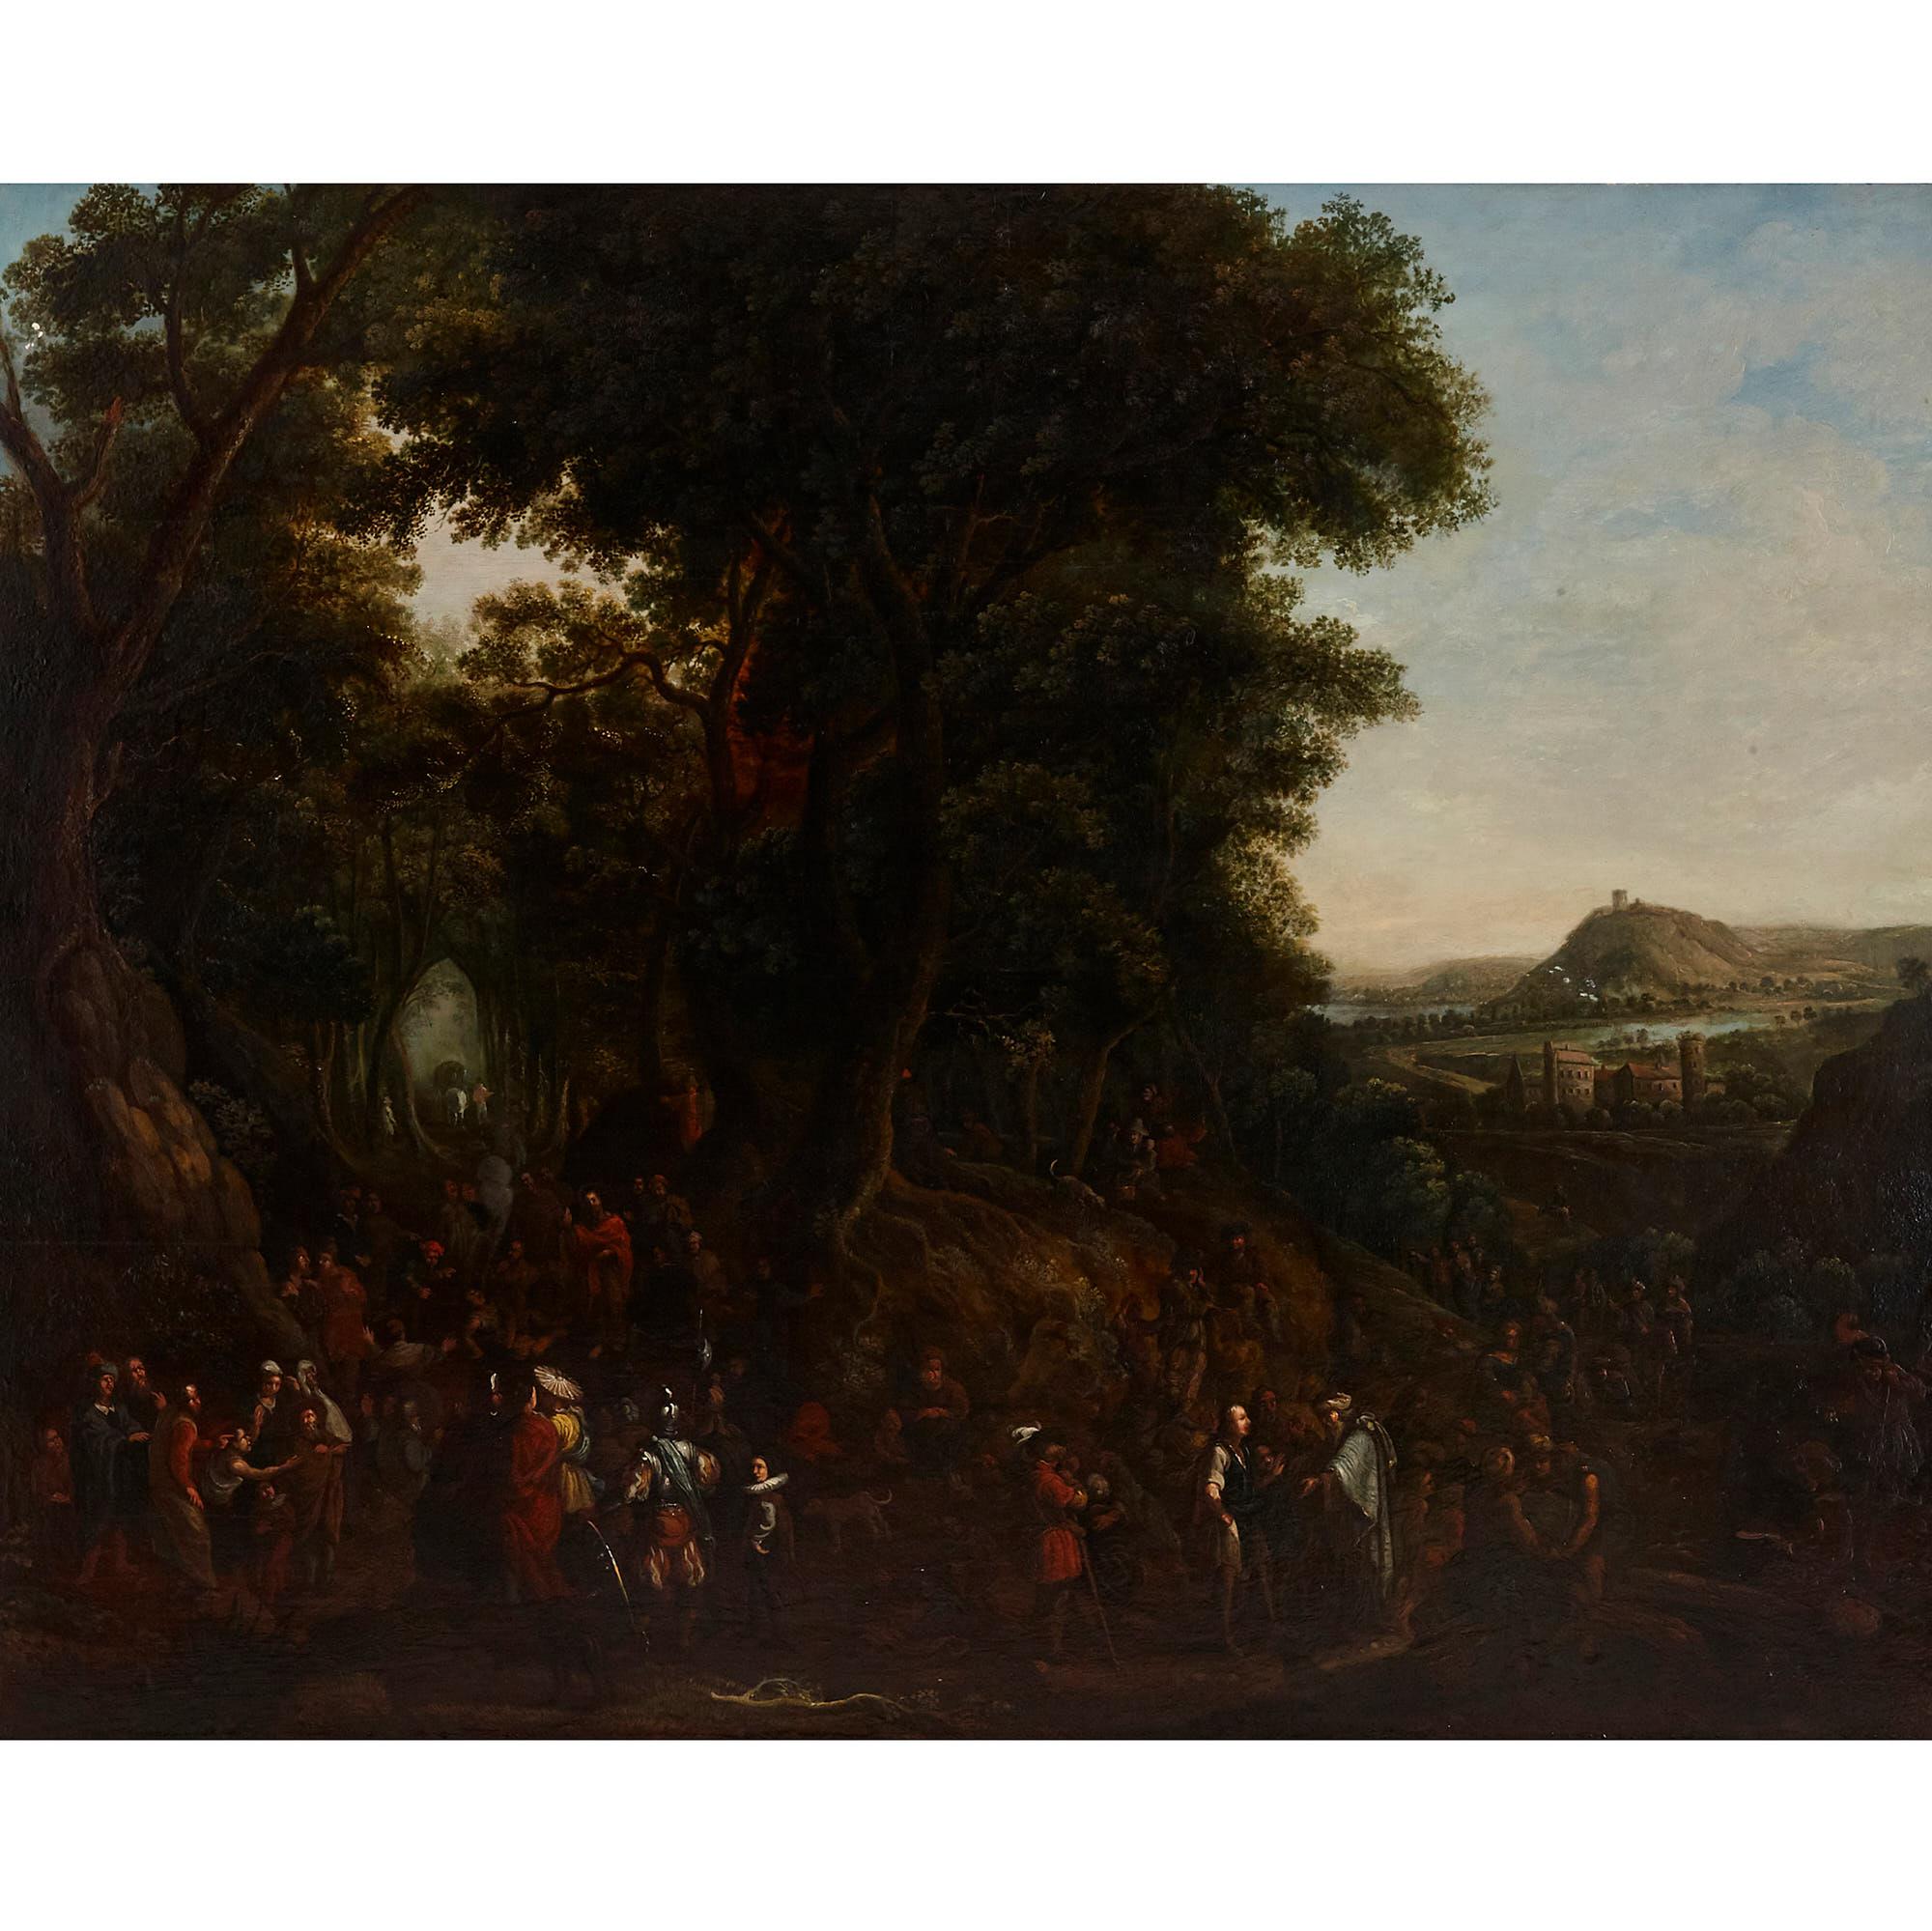 Two oil on panel Old Master landscape paintings by Johannes Jakob Hartmann (Bohemian, 1680-1730)
Bohemia, early 18th Century

Panel: Height 73cm, width 93cm
Frame: Height 90cm, width 107cm, depth 4cm 

These paintings are created by the renowned